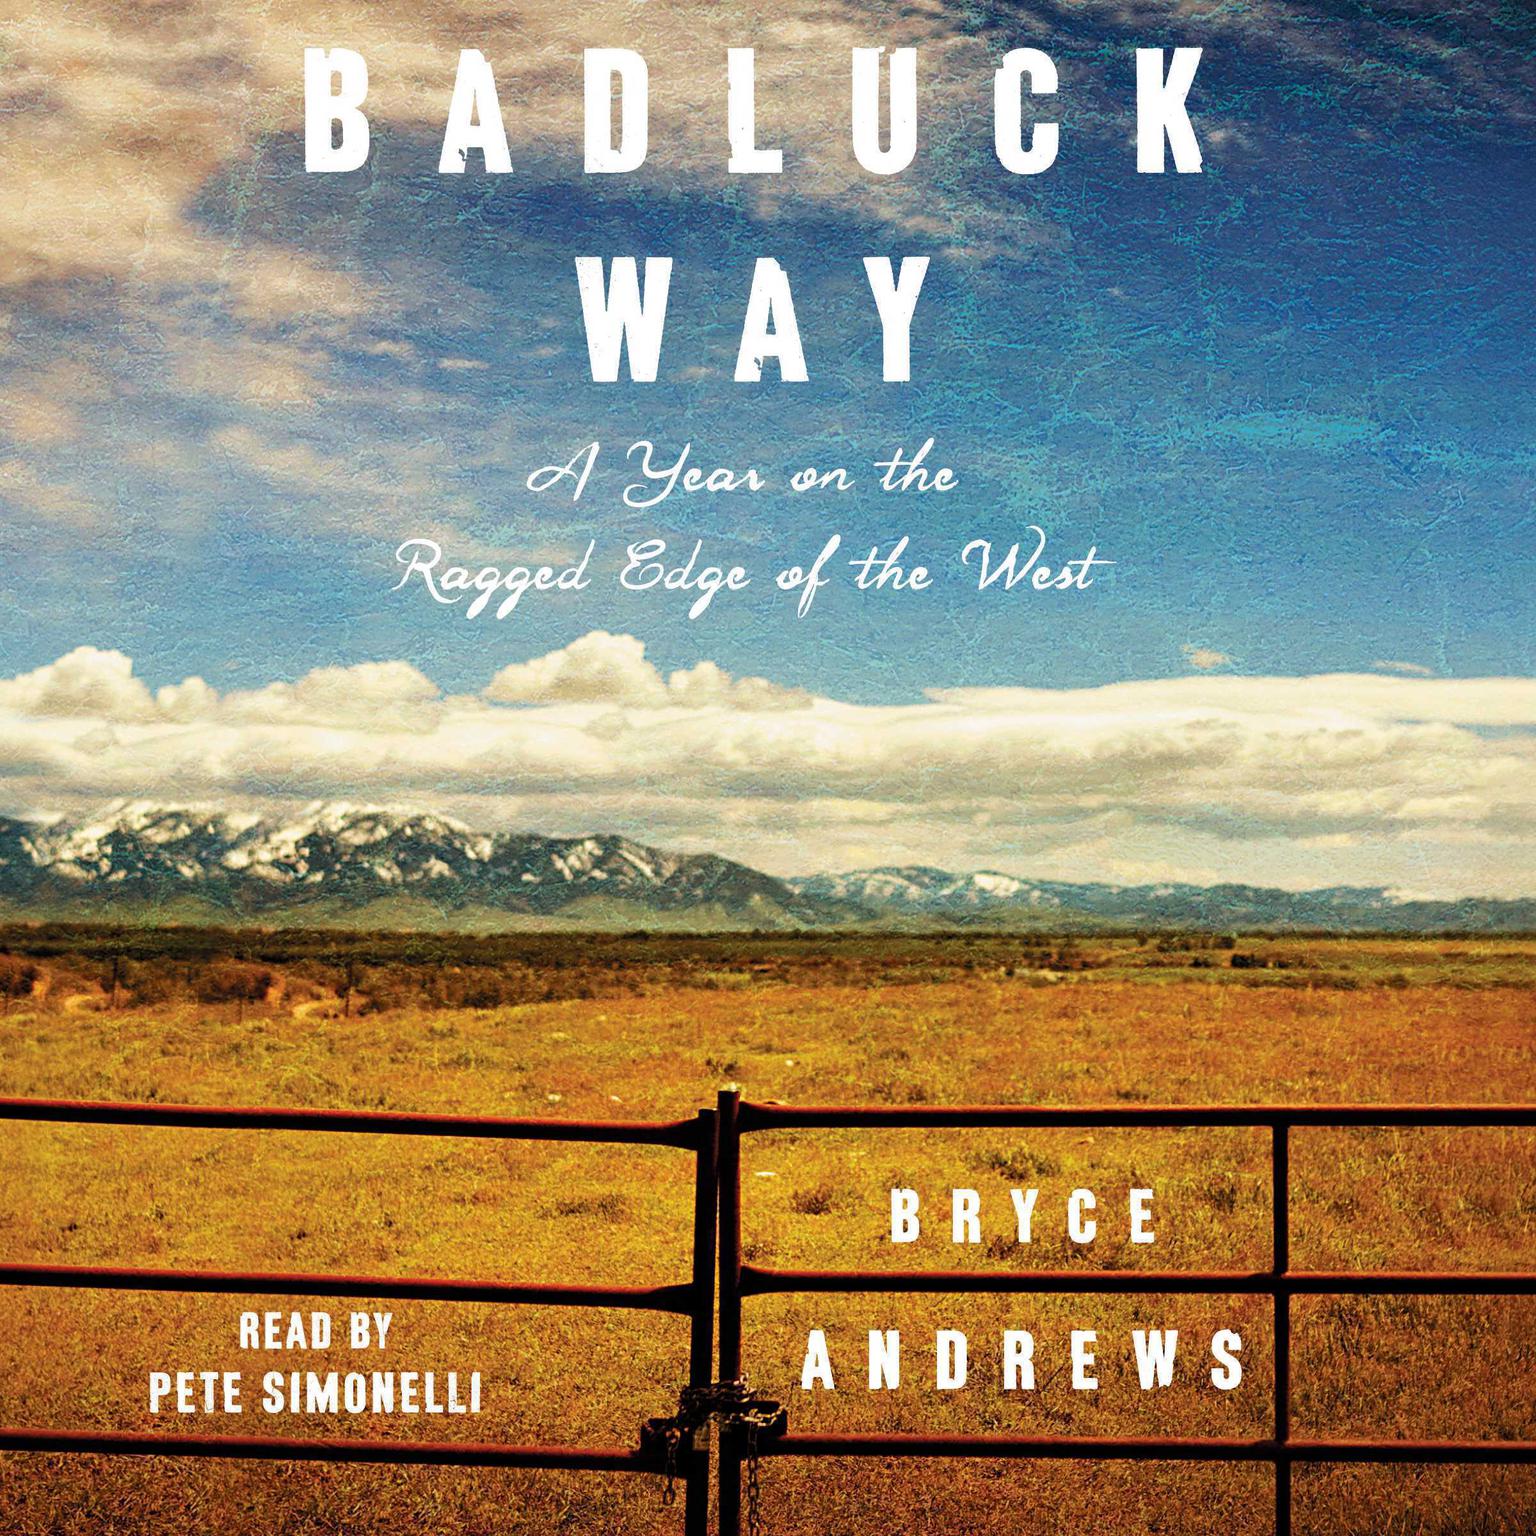 Badluck Way: A Year on the Ragged Edge of the West Audiobook, by Bryce Andrews